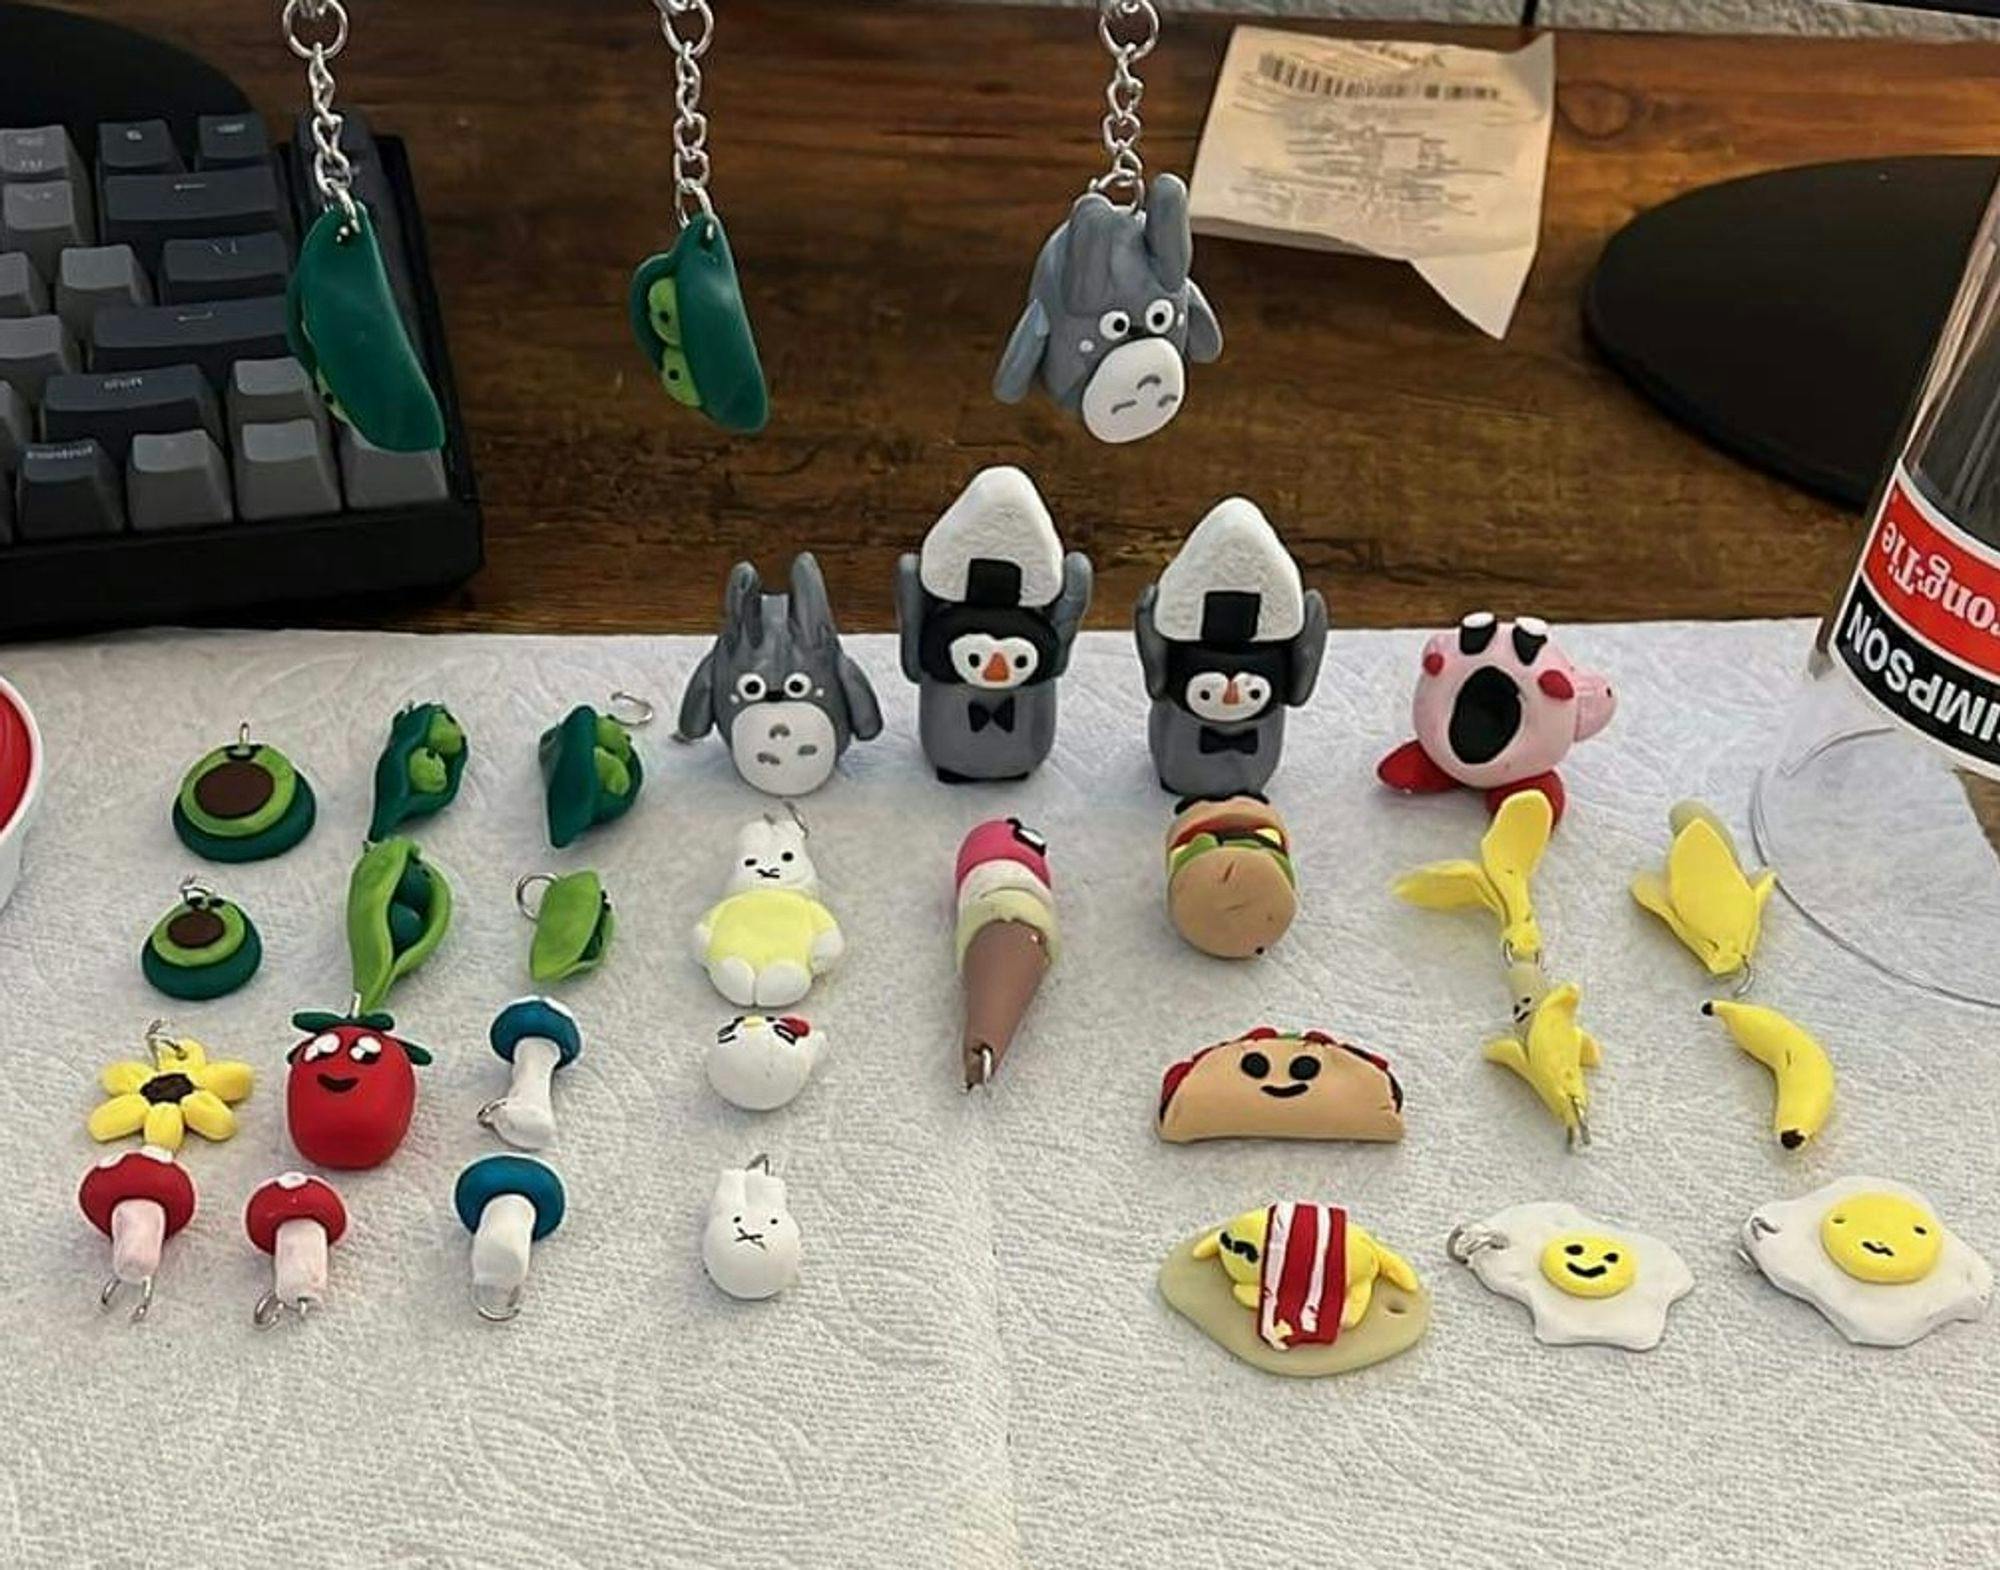 We made cute polymer clay keychains